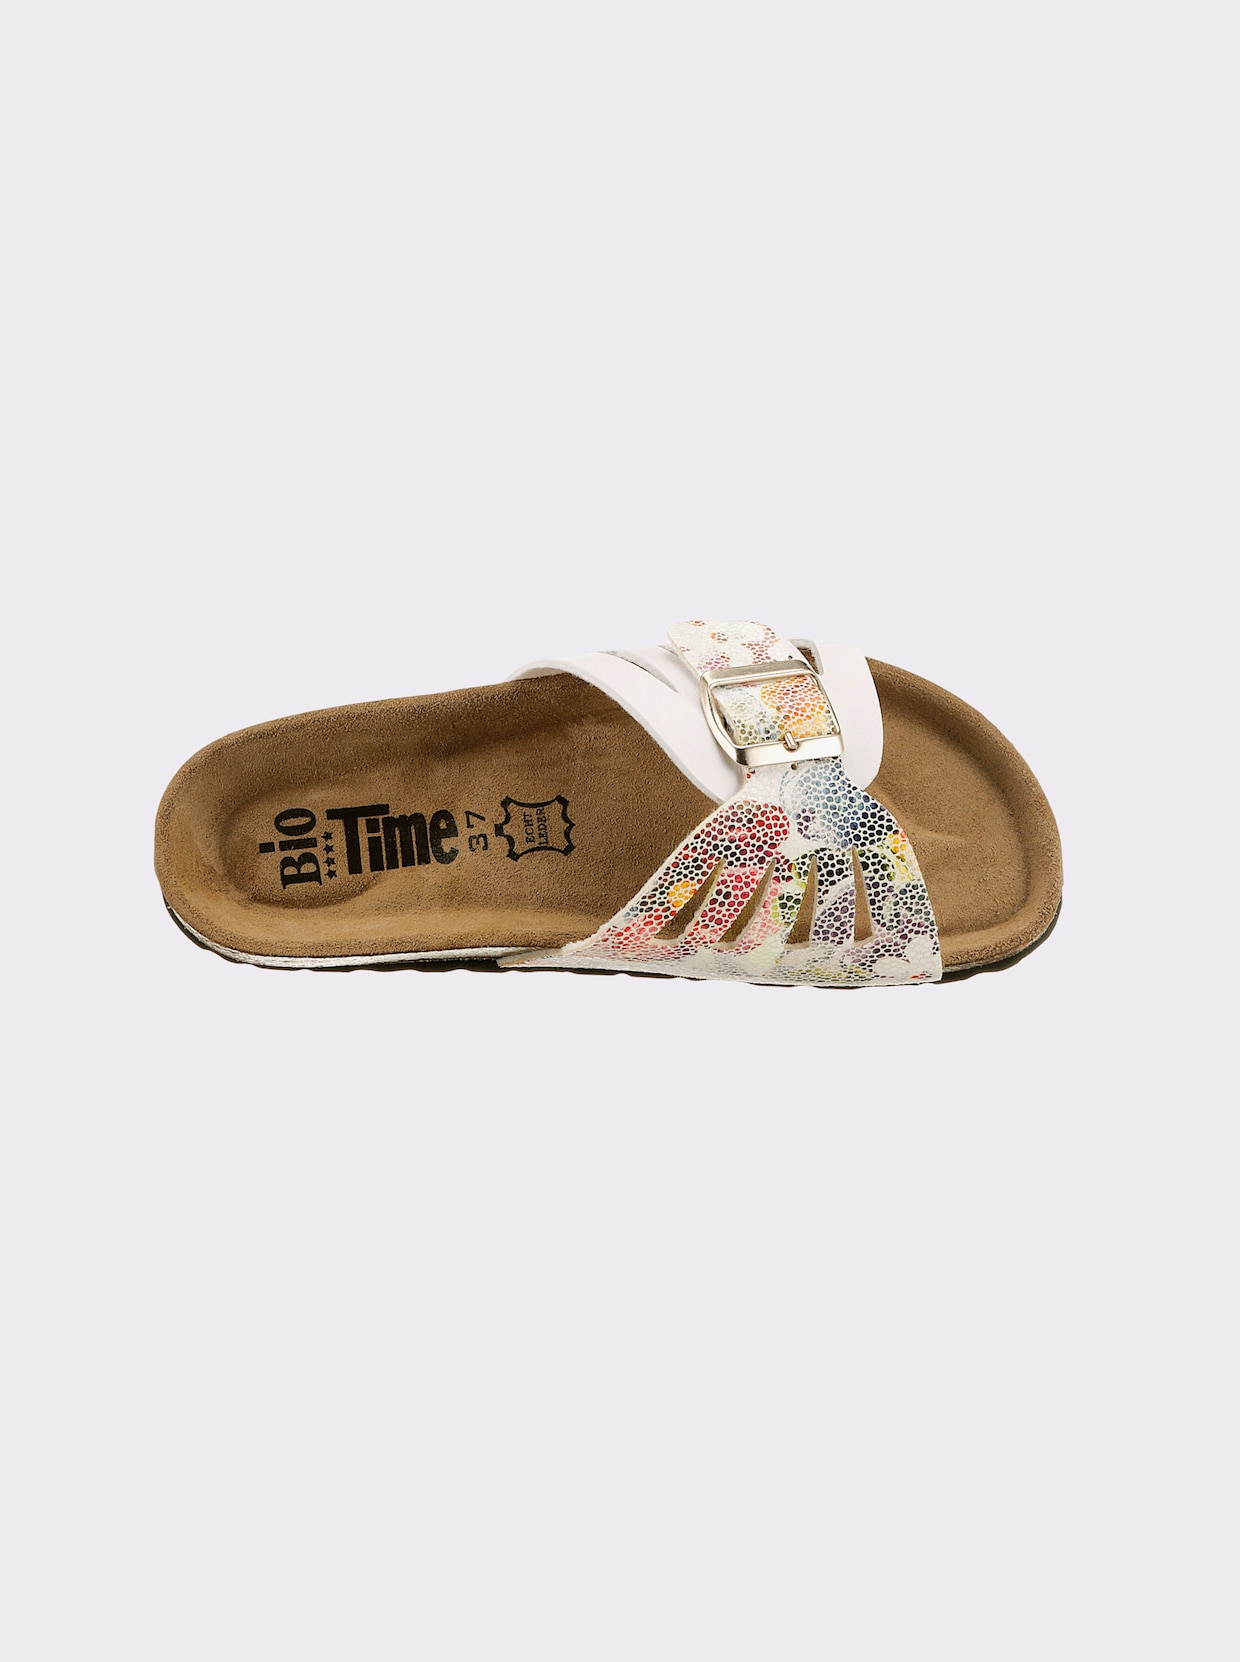 Bio Time slippers - wit